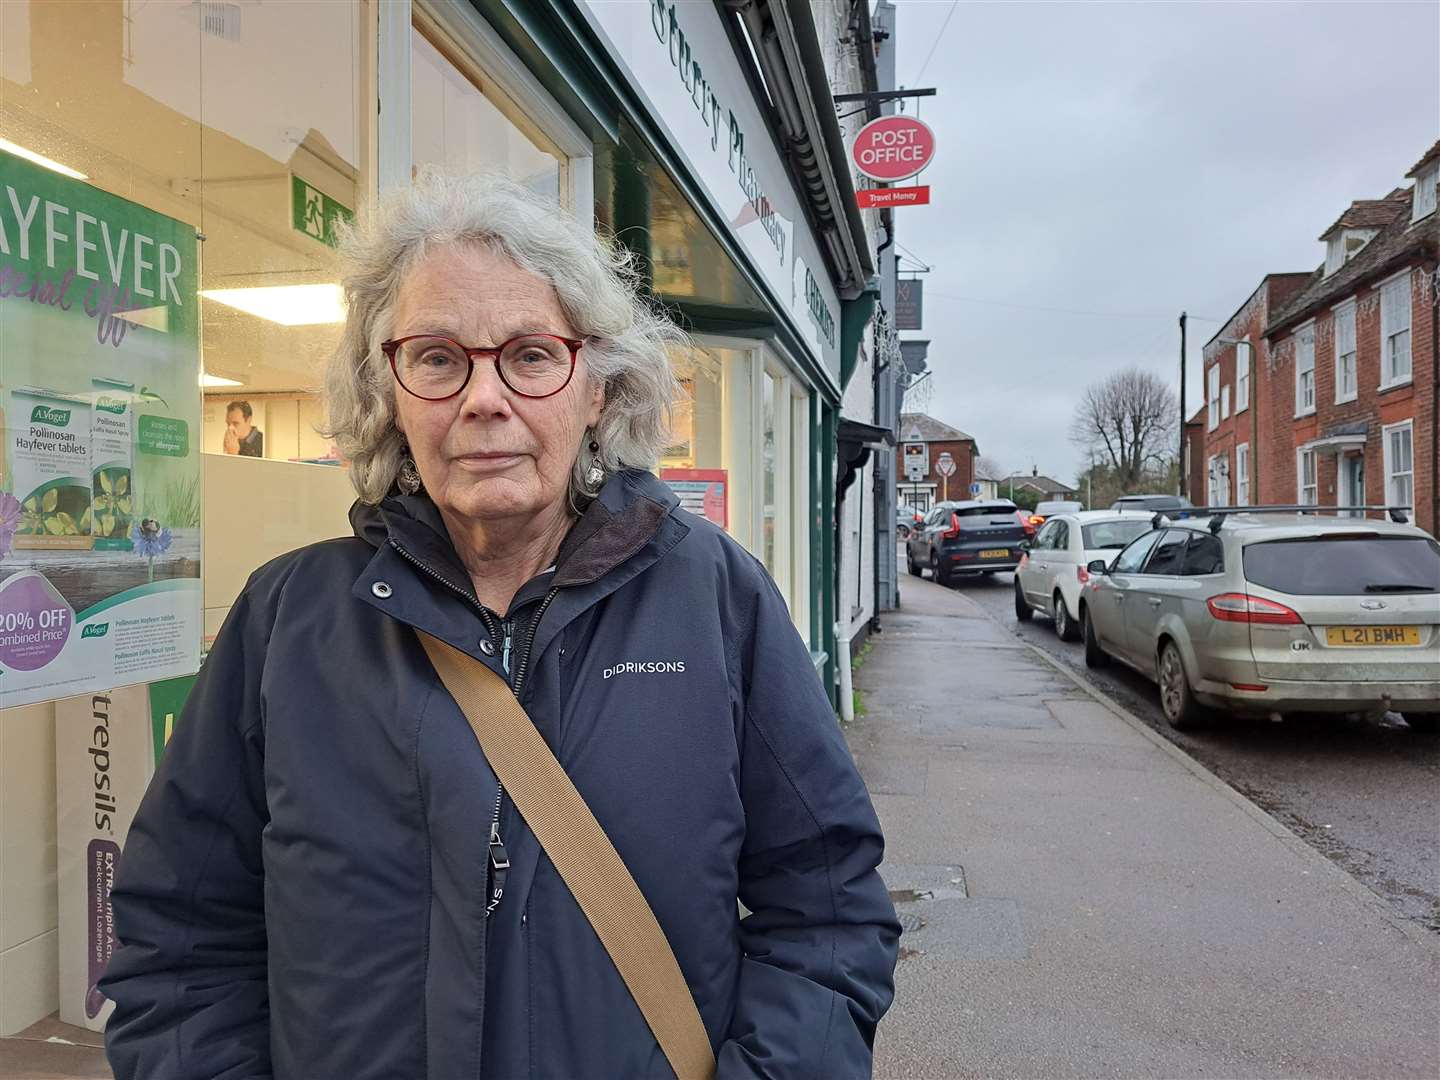 Resident Peta Boucher opposes the closure of the "community" post office in Sturry, near Canterbury